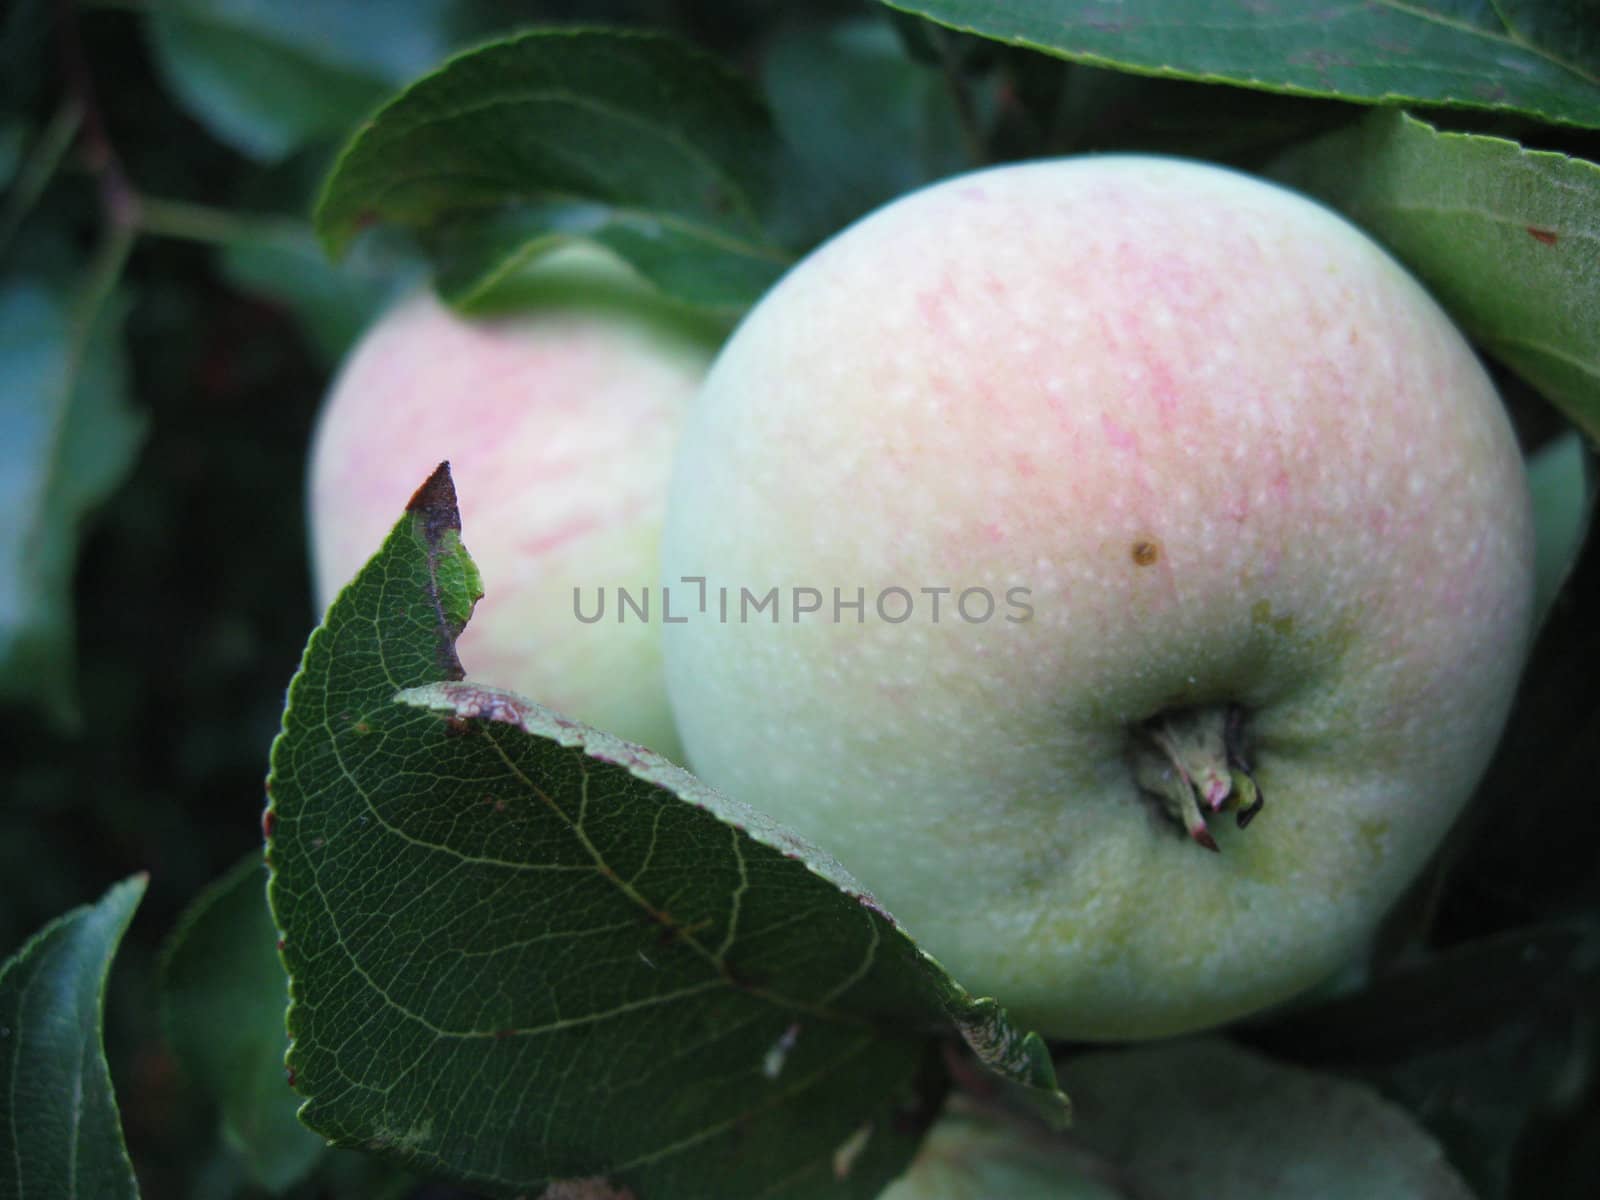 Two unripe apples hanging on a tree